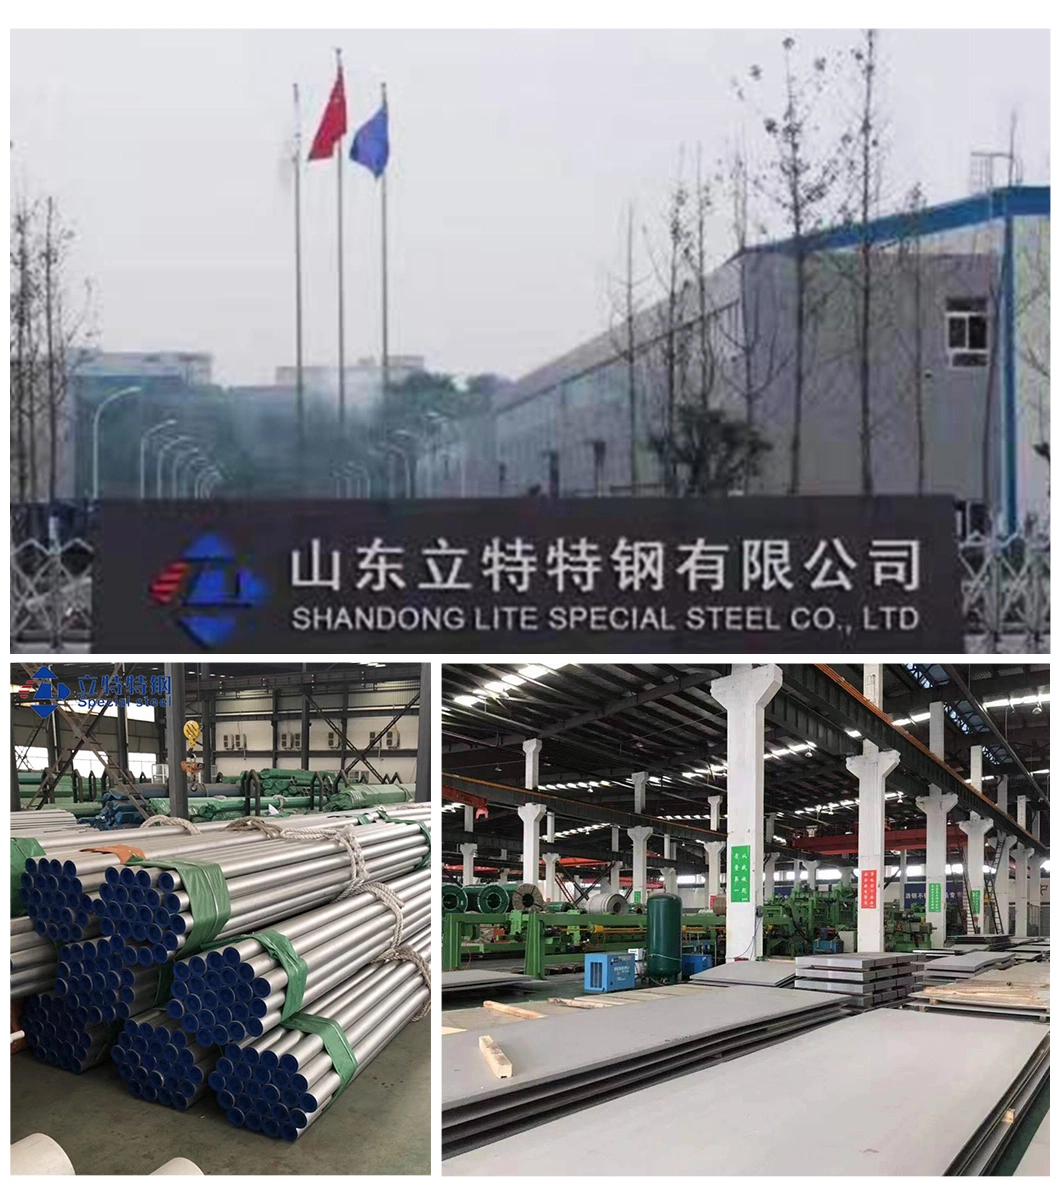 Stainless Steel Round Bar Ss 304L 306L 904L 310S 321 304 301 302 303 631 Hc 273 C22 800h 925 SAE 52100 Round Bar Stainless Steel Rod